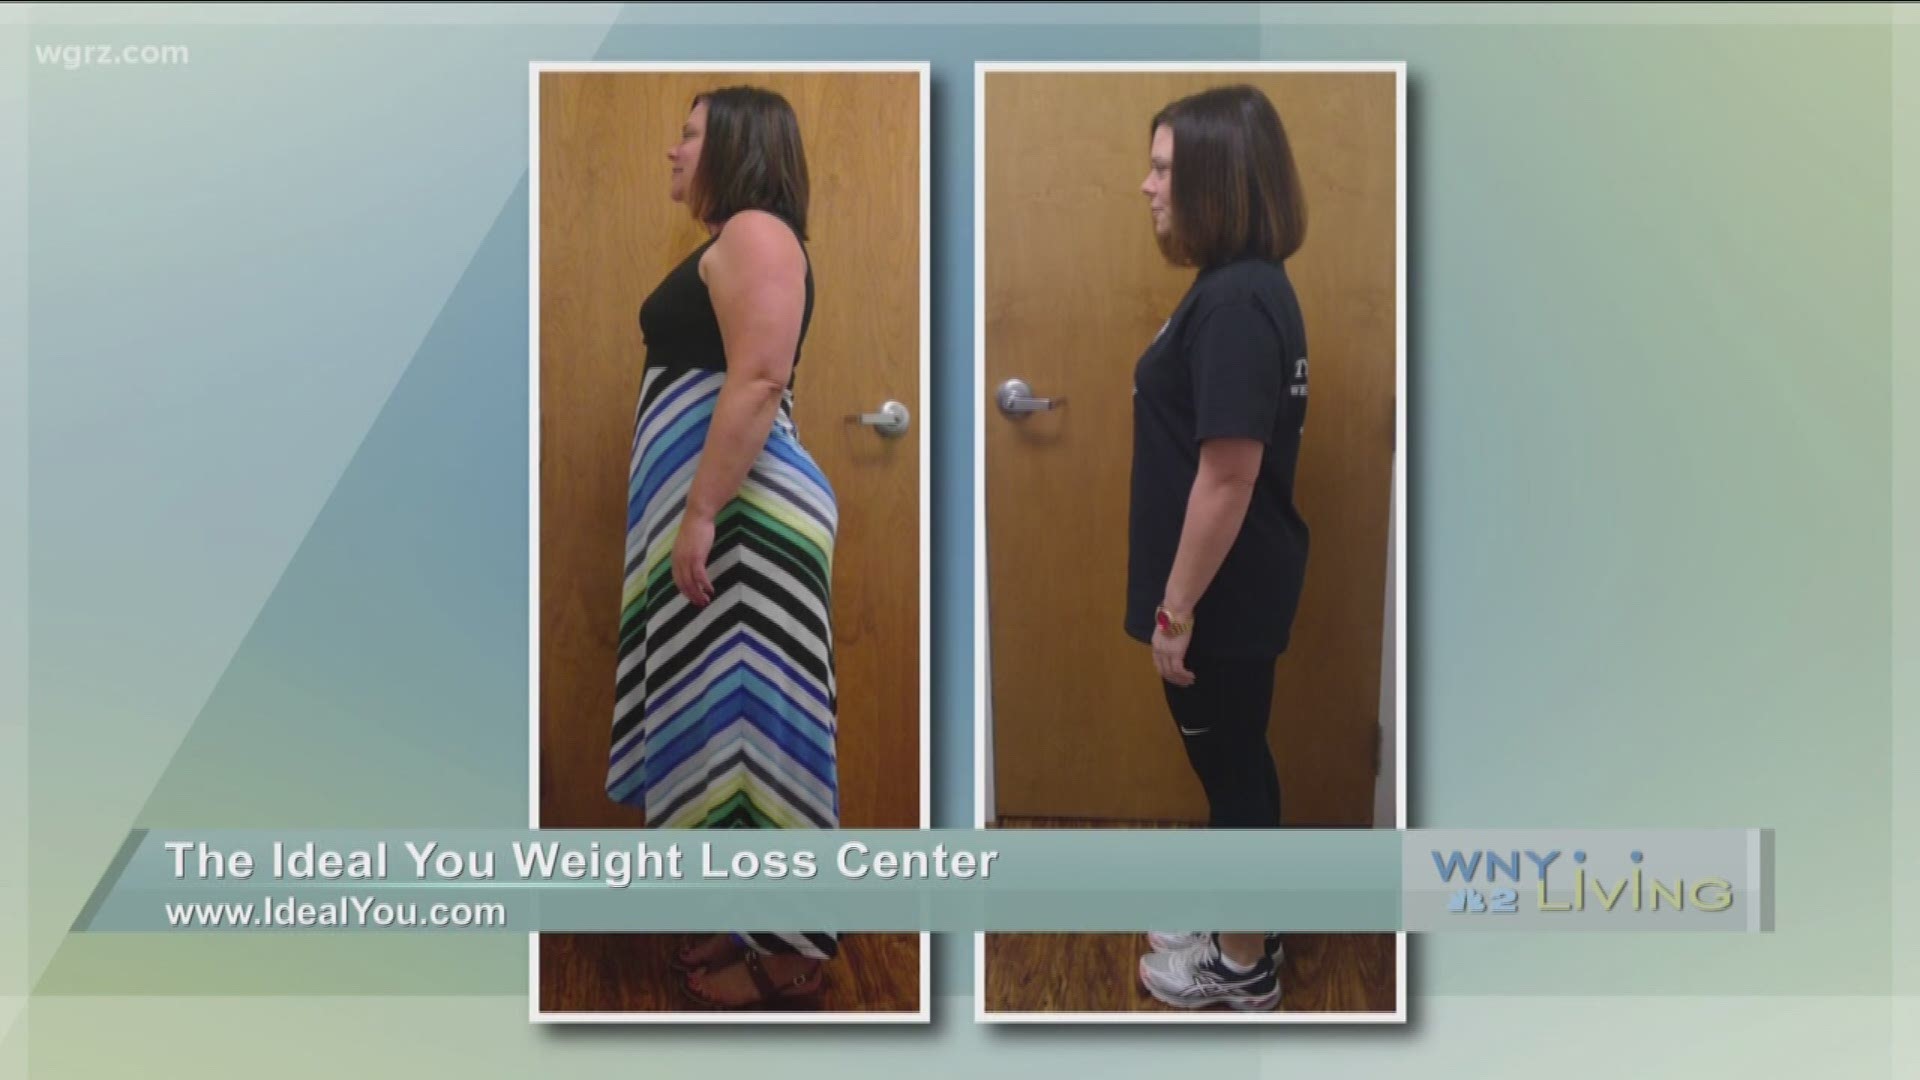 WNY Living - April 9 - The Ideal You Weight Loss Center